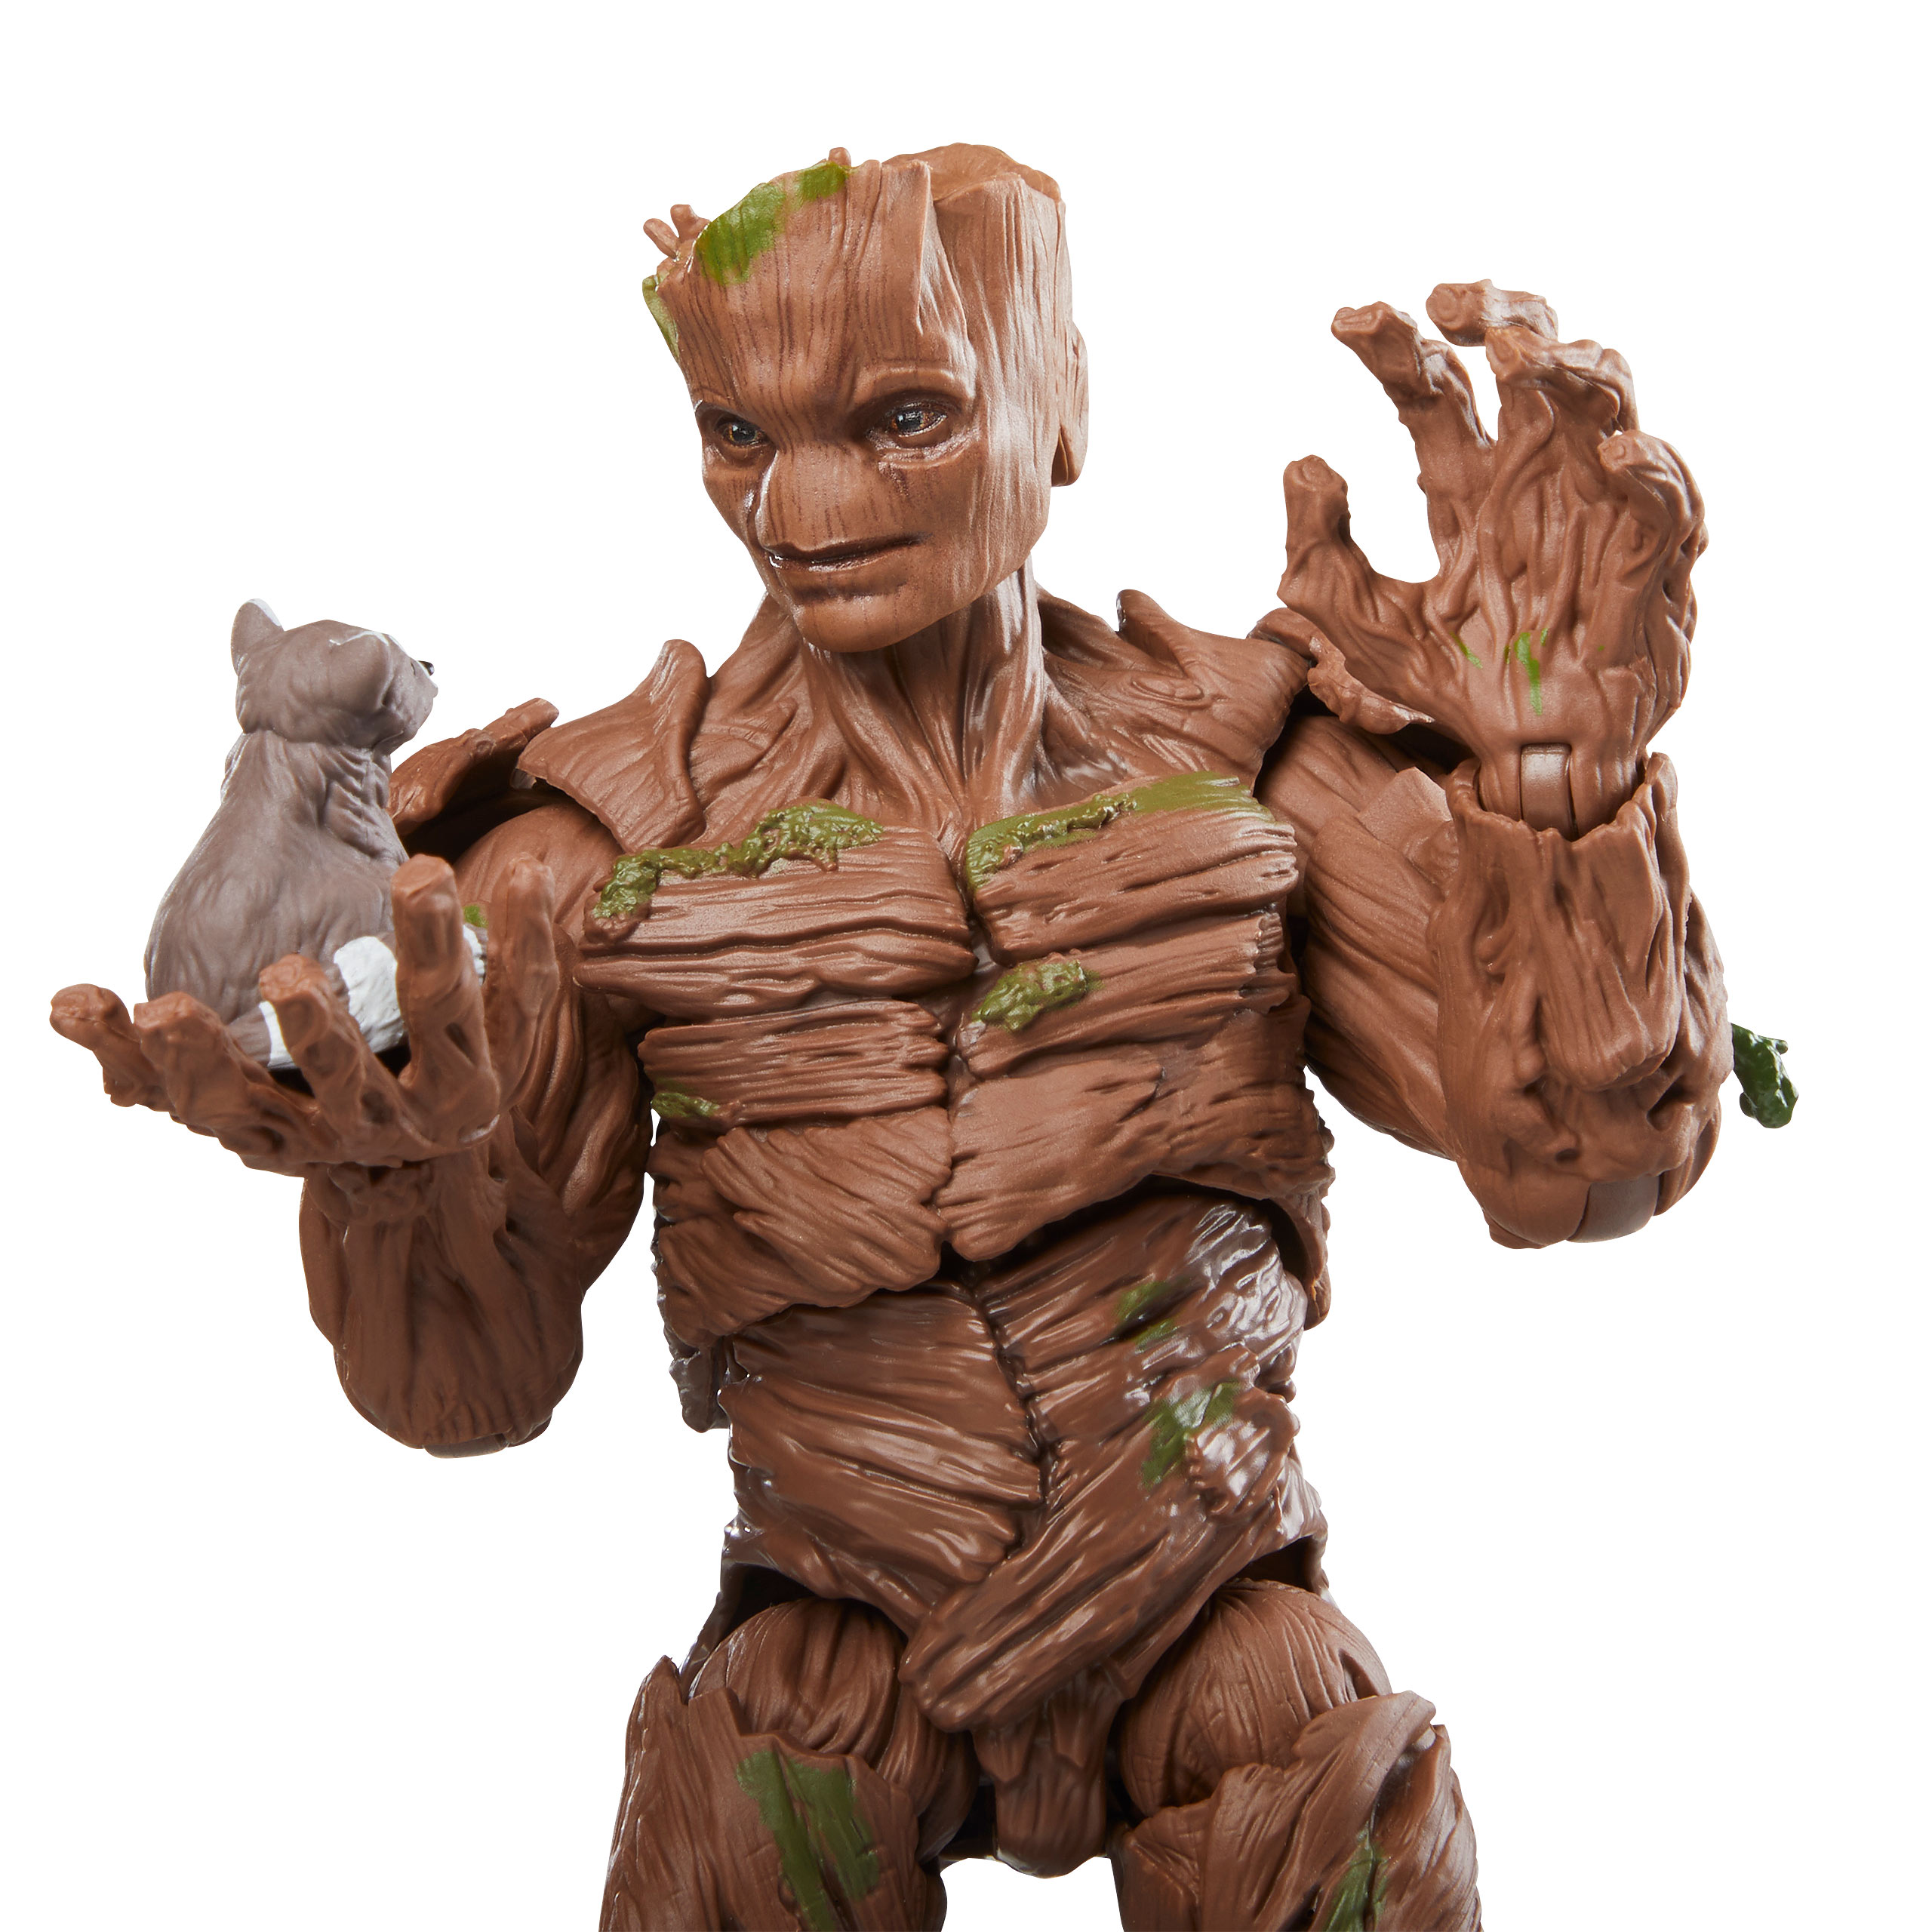 Guardians of the Galaxy - Groot Marvel Legends Series Actionfigur